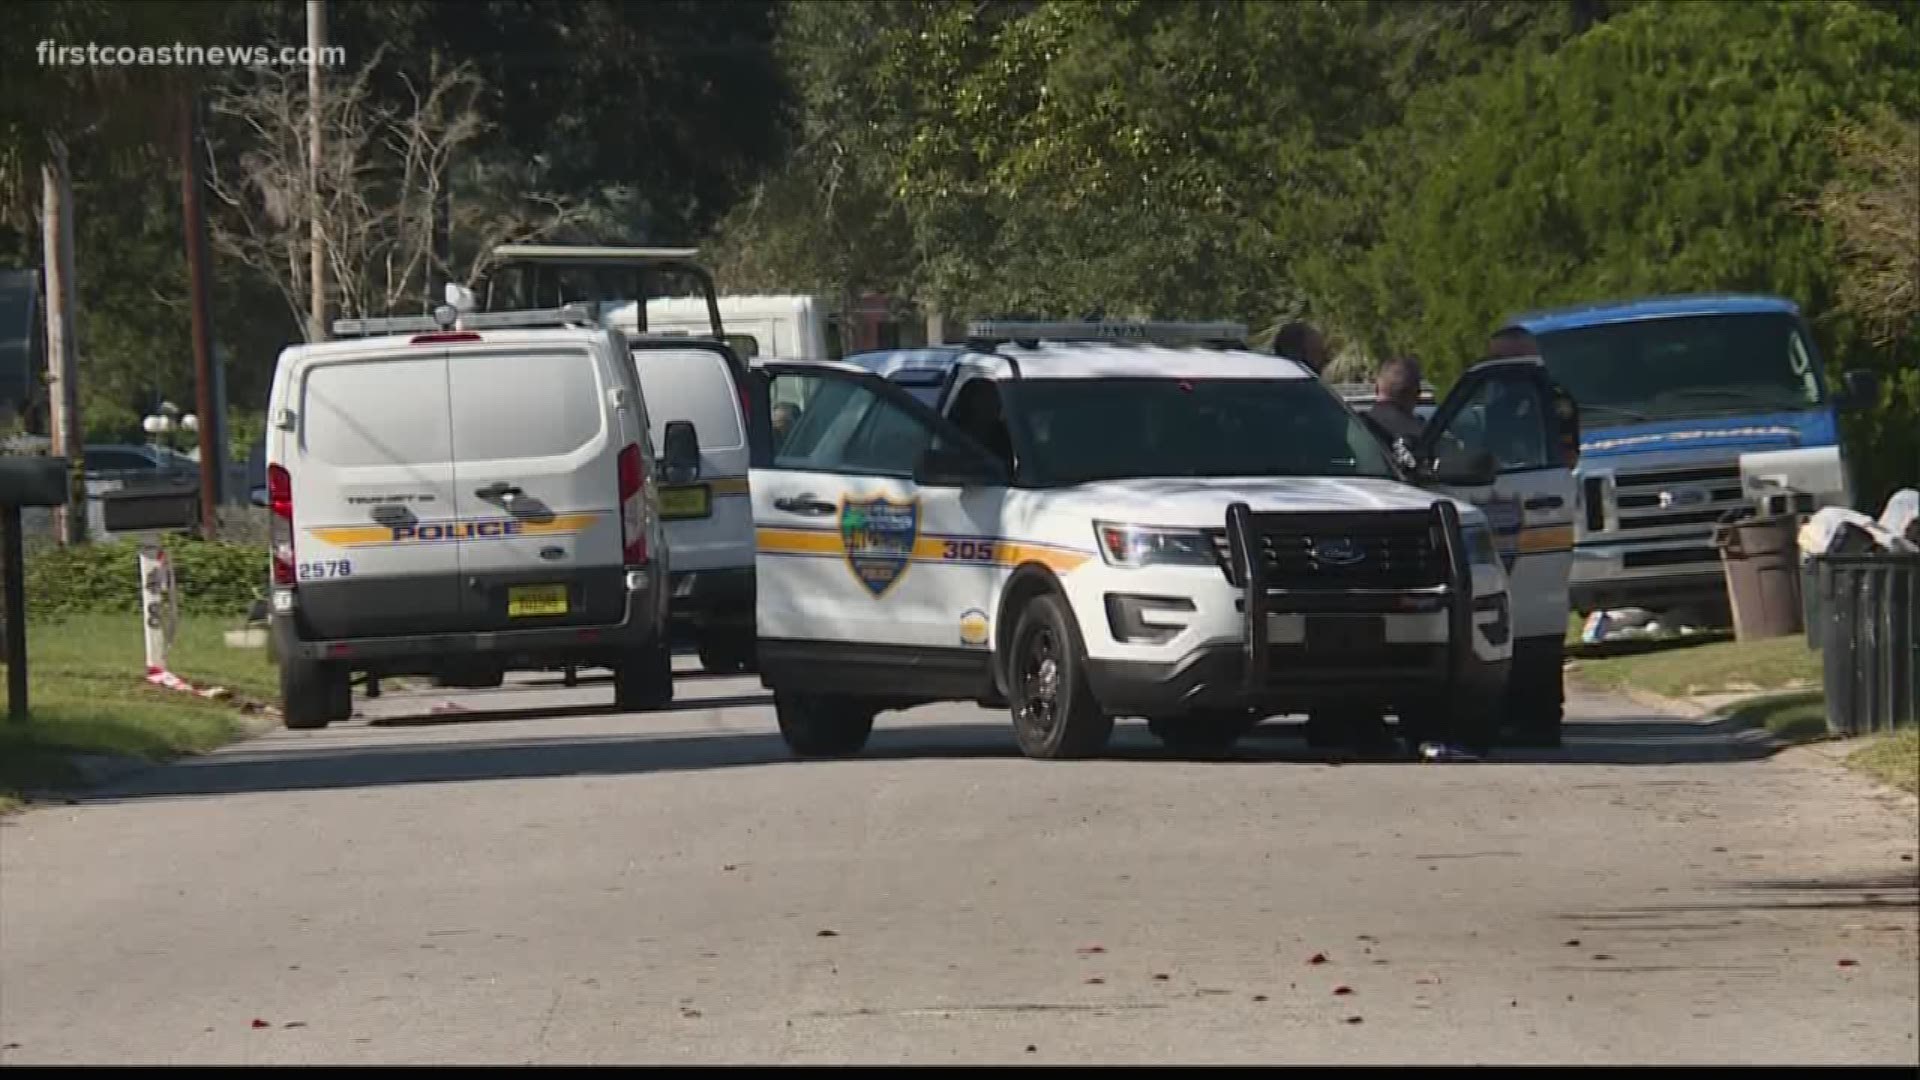 A dead man was found inside a white SUV in the Brentwood area of Jacksonville Tuesday, according to police.